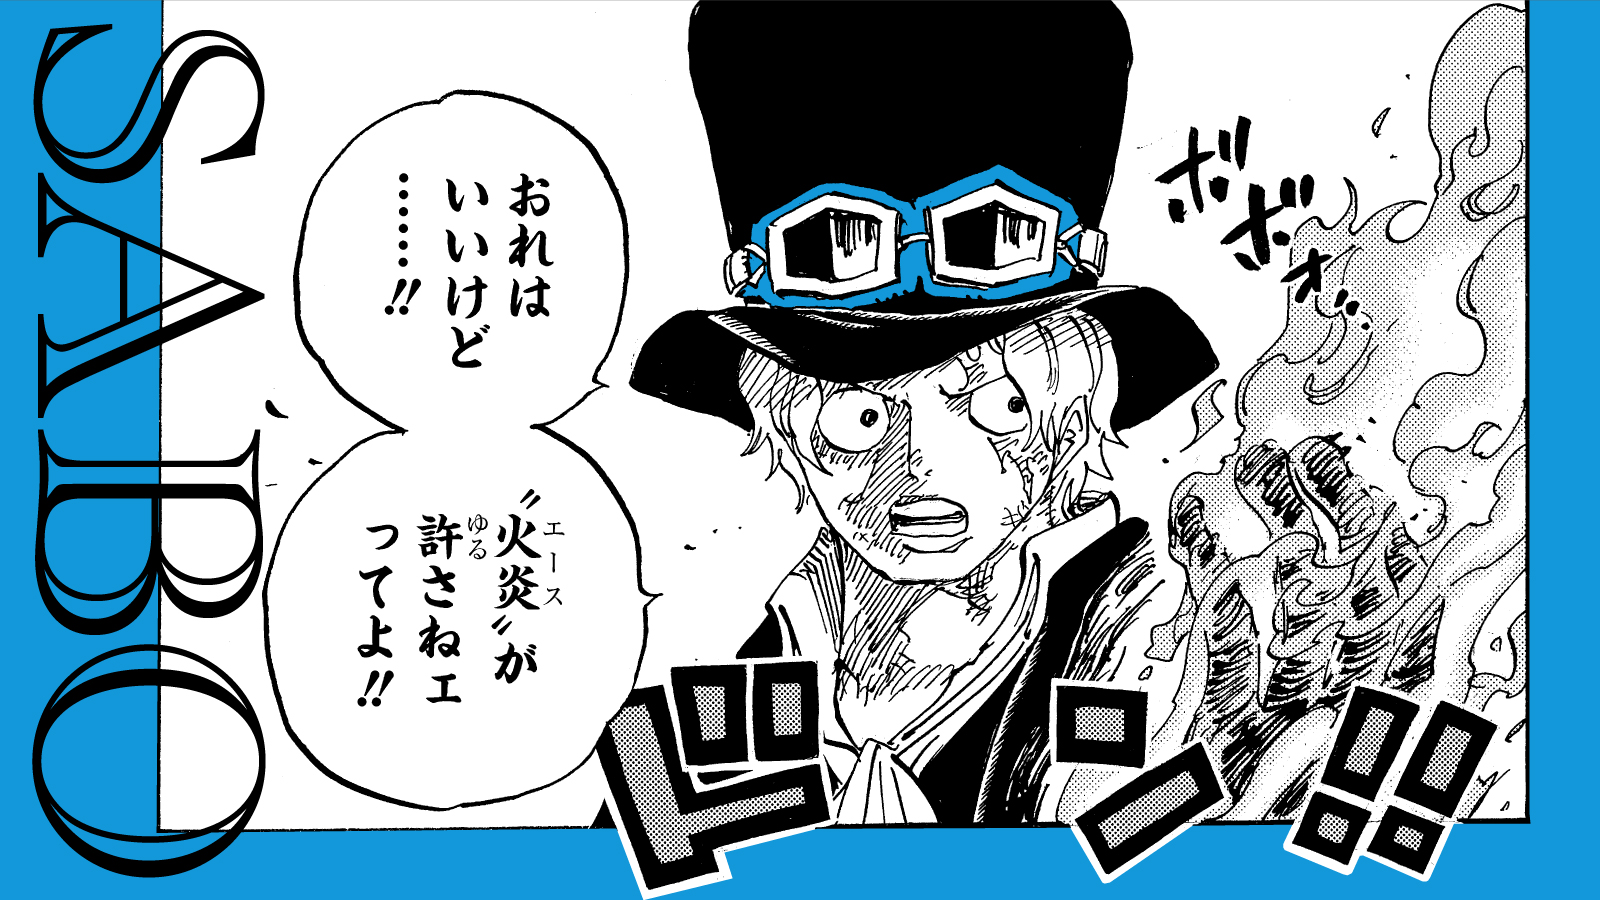 One Piece スタッフ 公式 Official 3 Happy Birthday Sabo サボ誕生祭21 Onepiece T Co Gwdvuea9sa Twitter